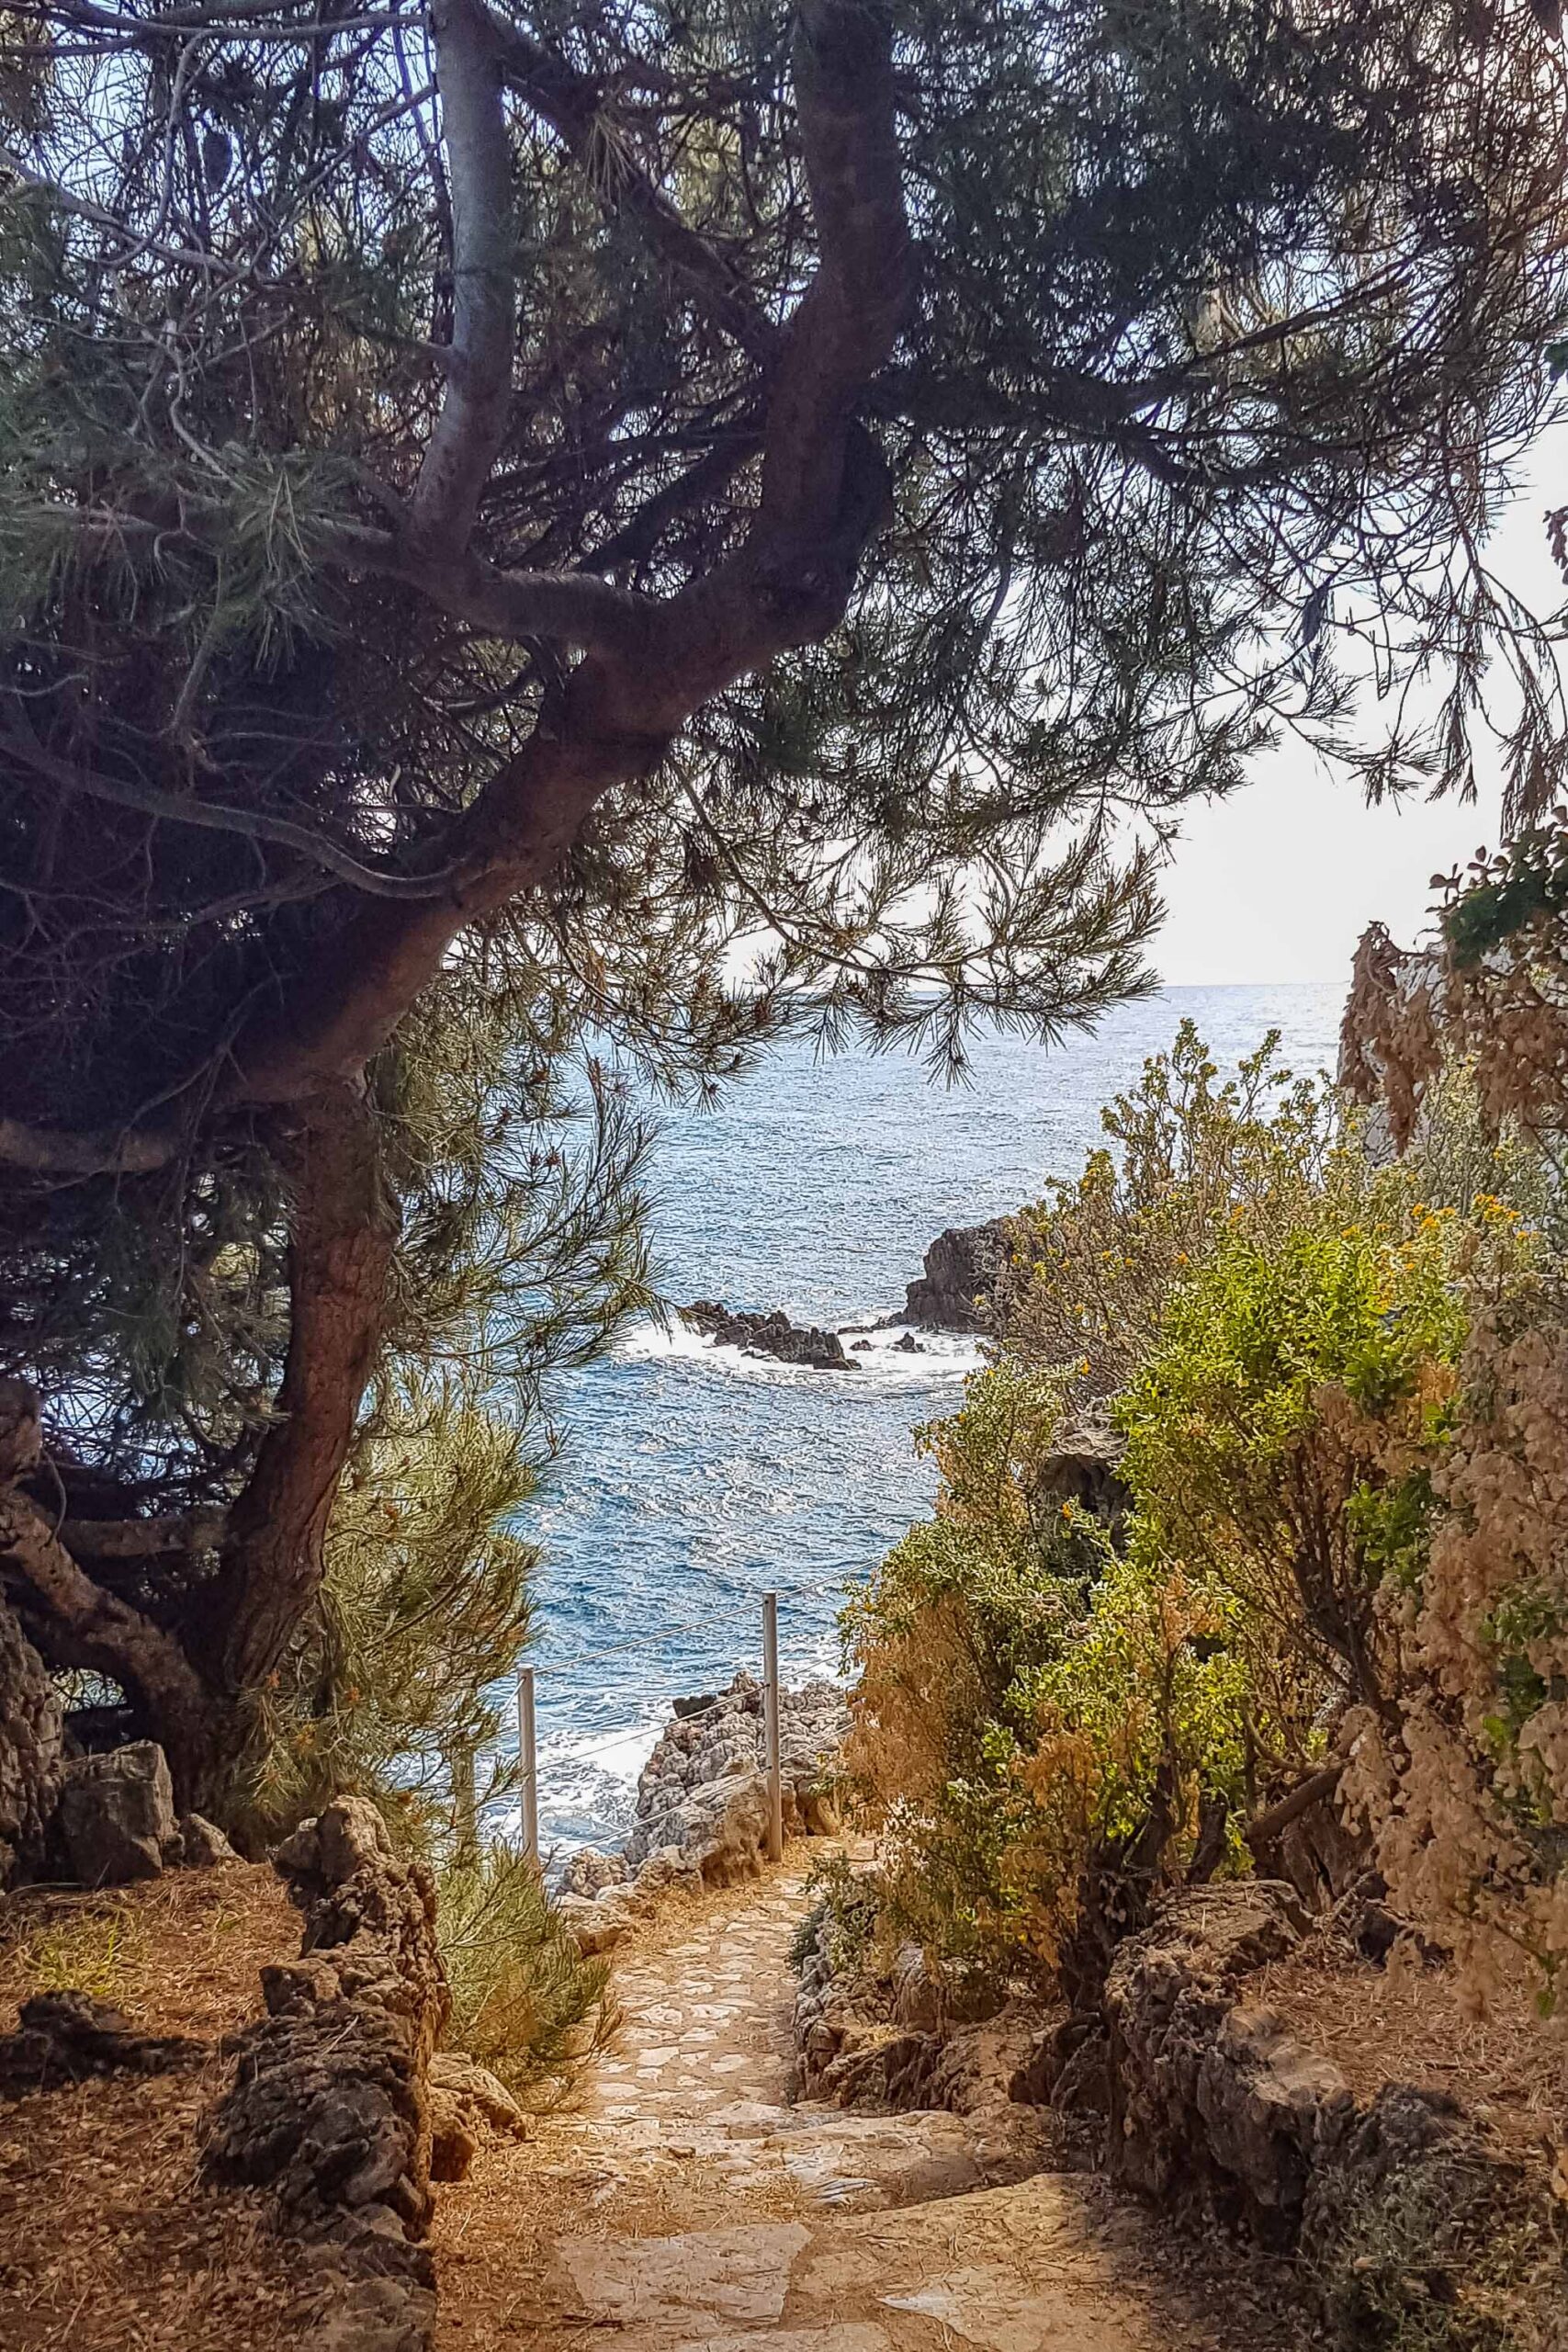 Staircase, vegetation and view of the Mediterranean Sea along the Sentier du Littoral hiking trail during a sunny day in Antibes, France